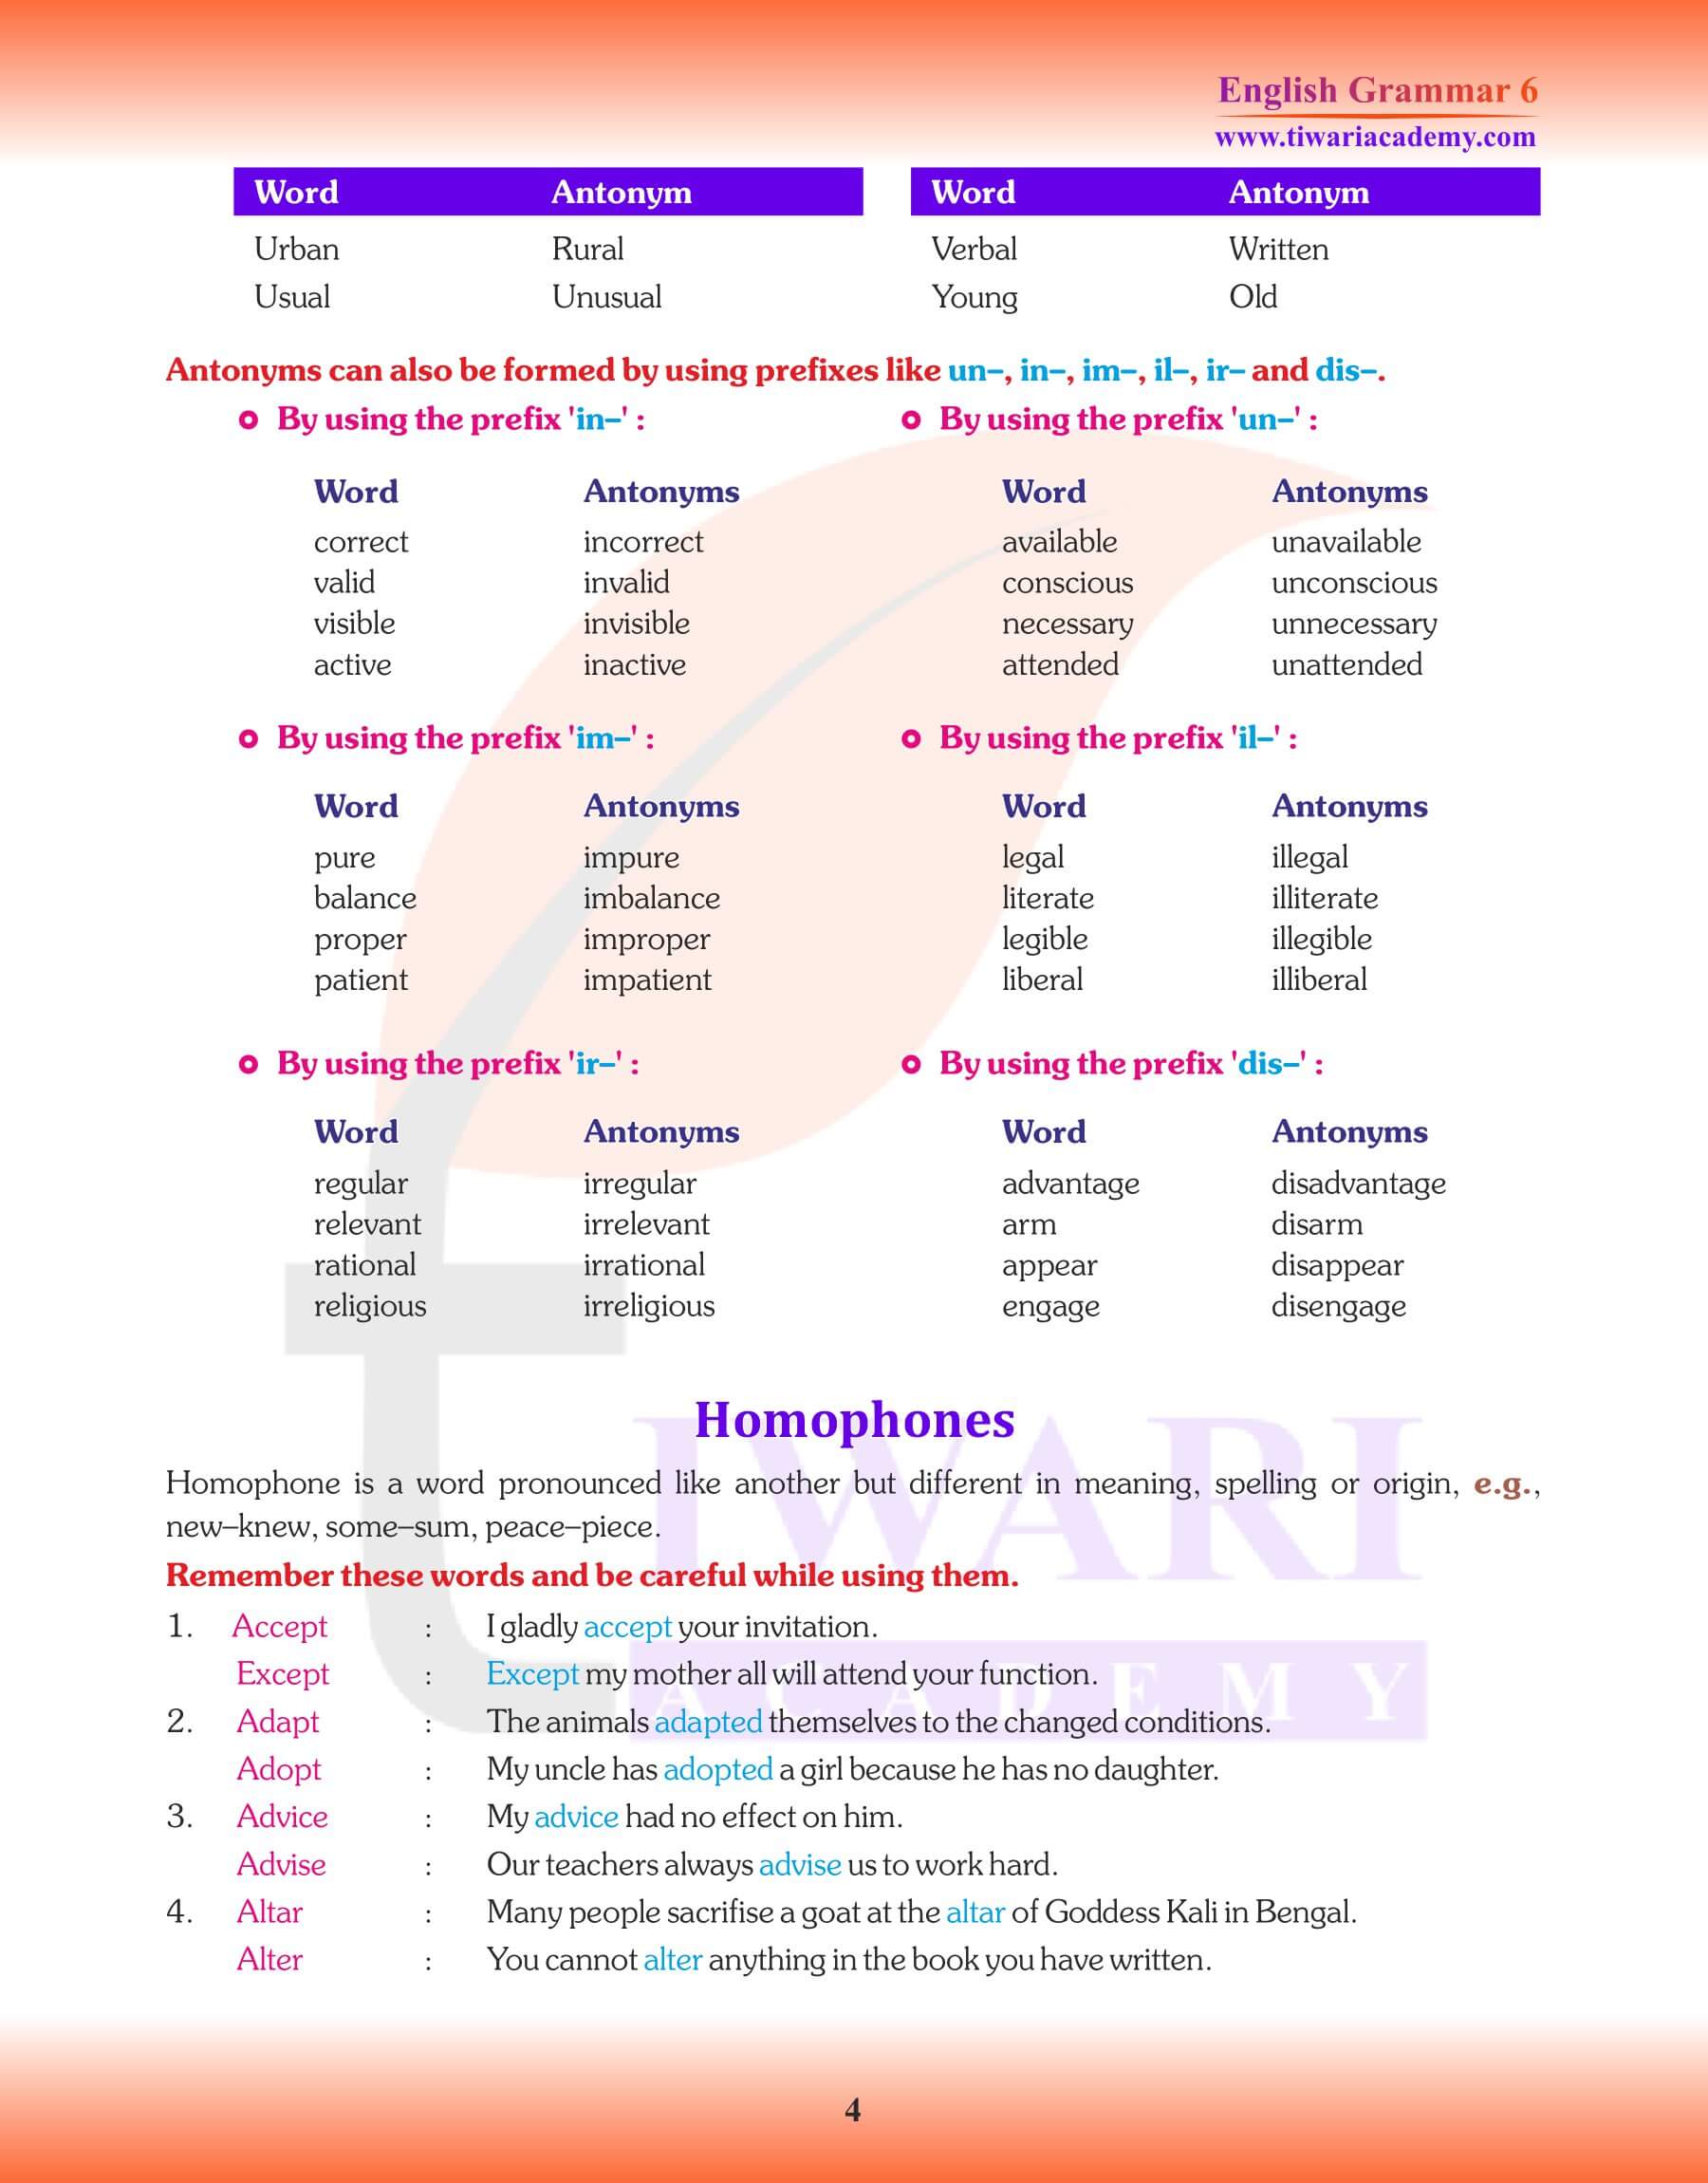 Class 6th English Grammar Vocabulary and Word Power Exercises